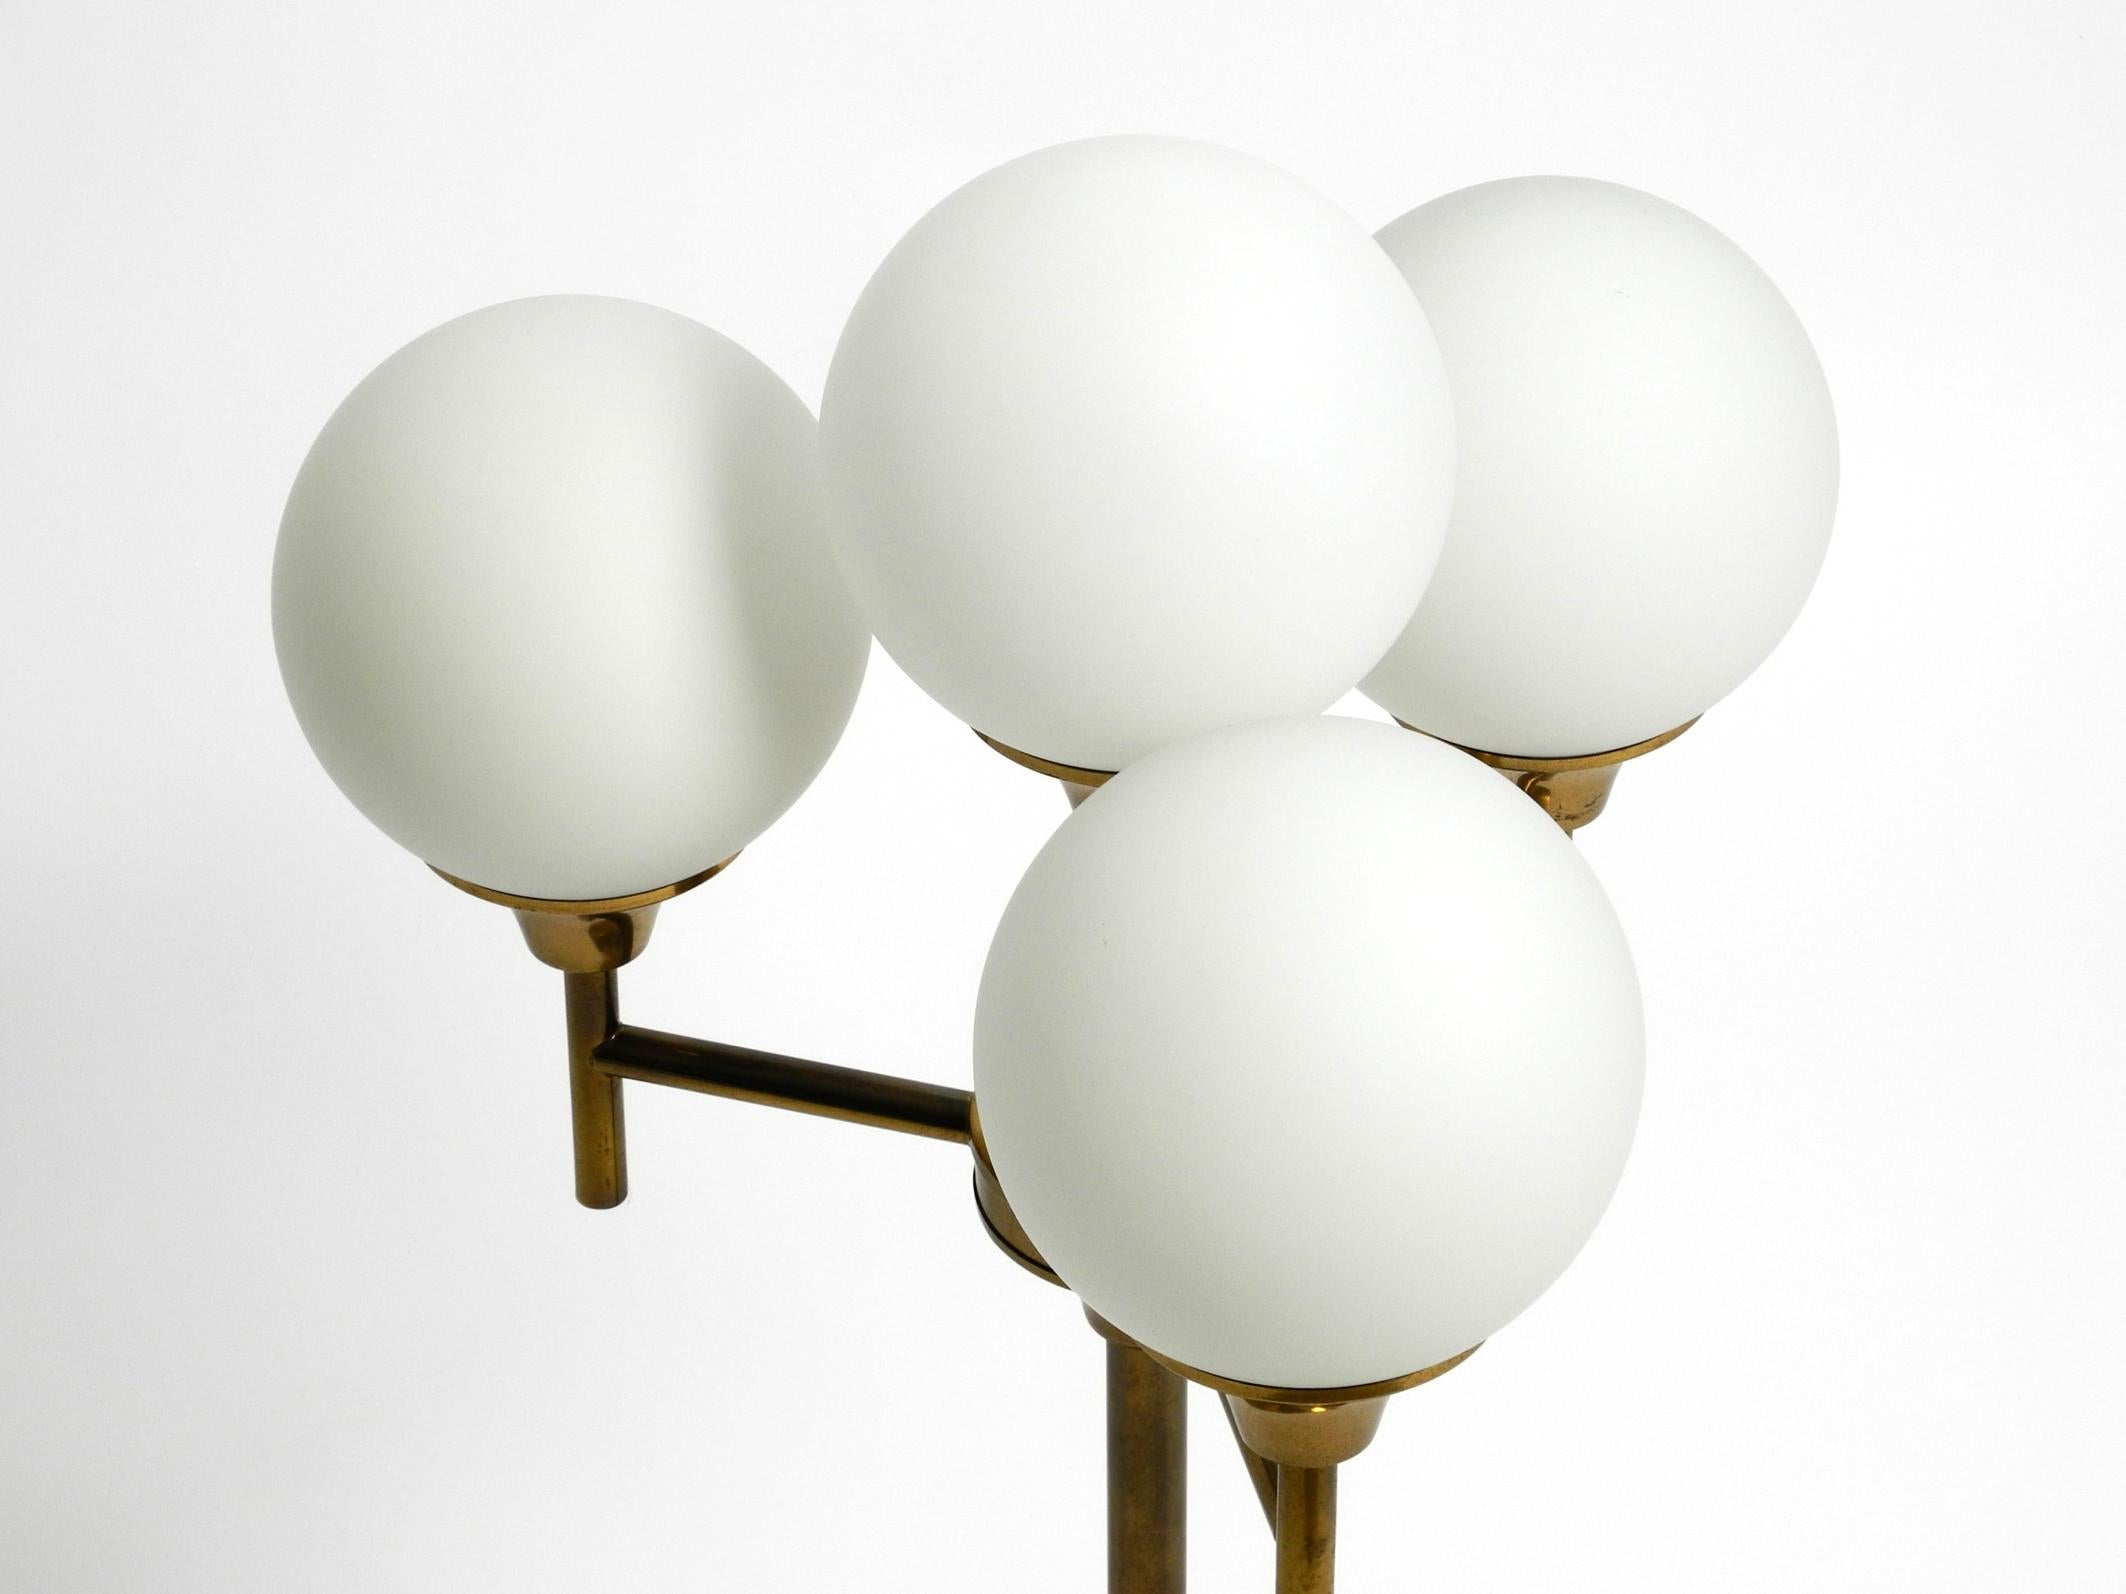 Large 1960s brass table or floor lamp with 4 glass spheres by Kaiser Leuchten For Sale 9